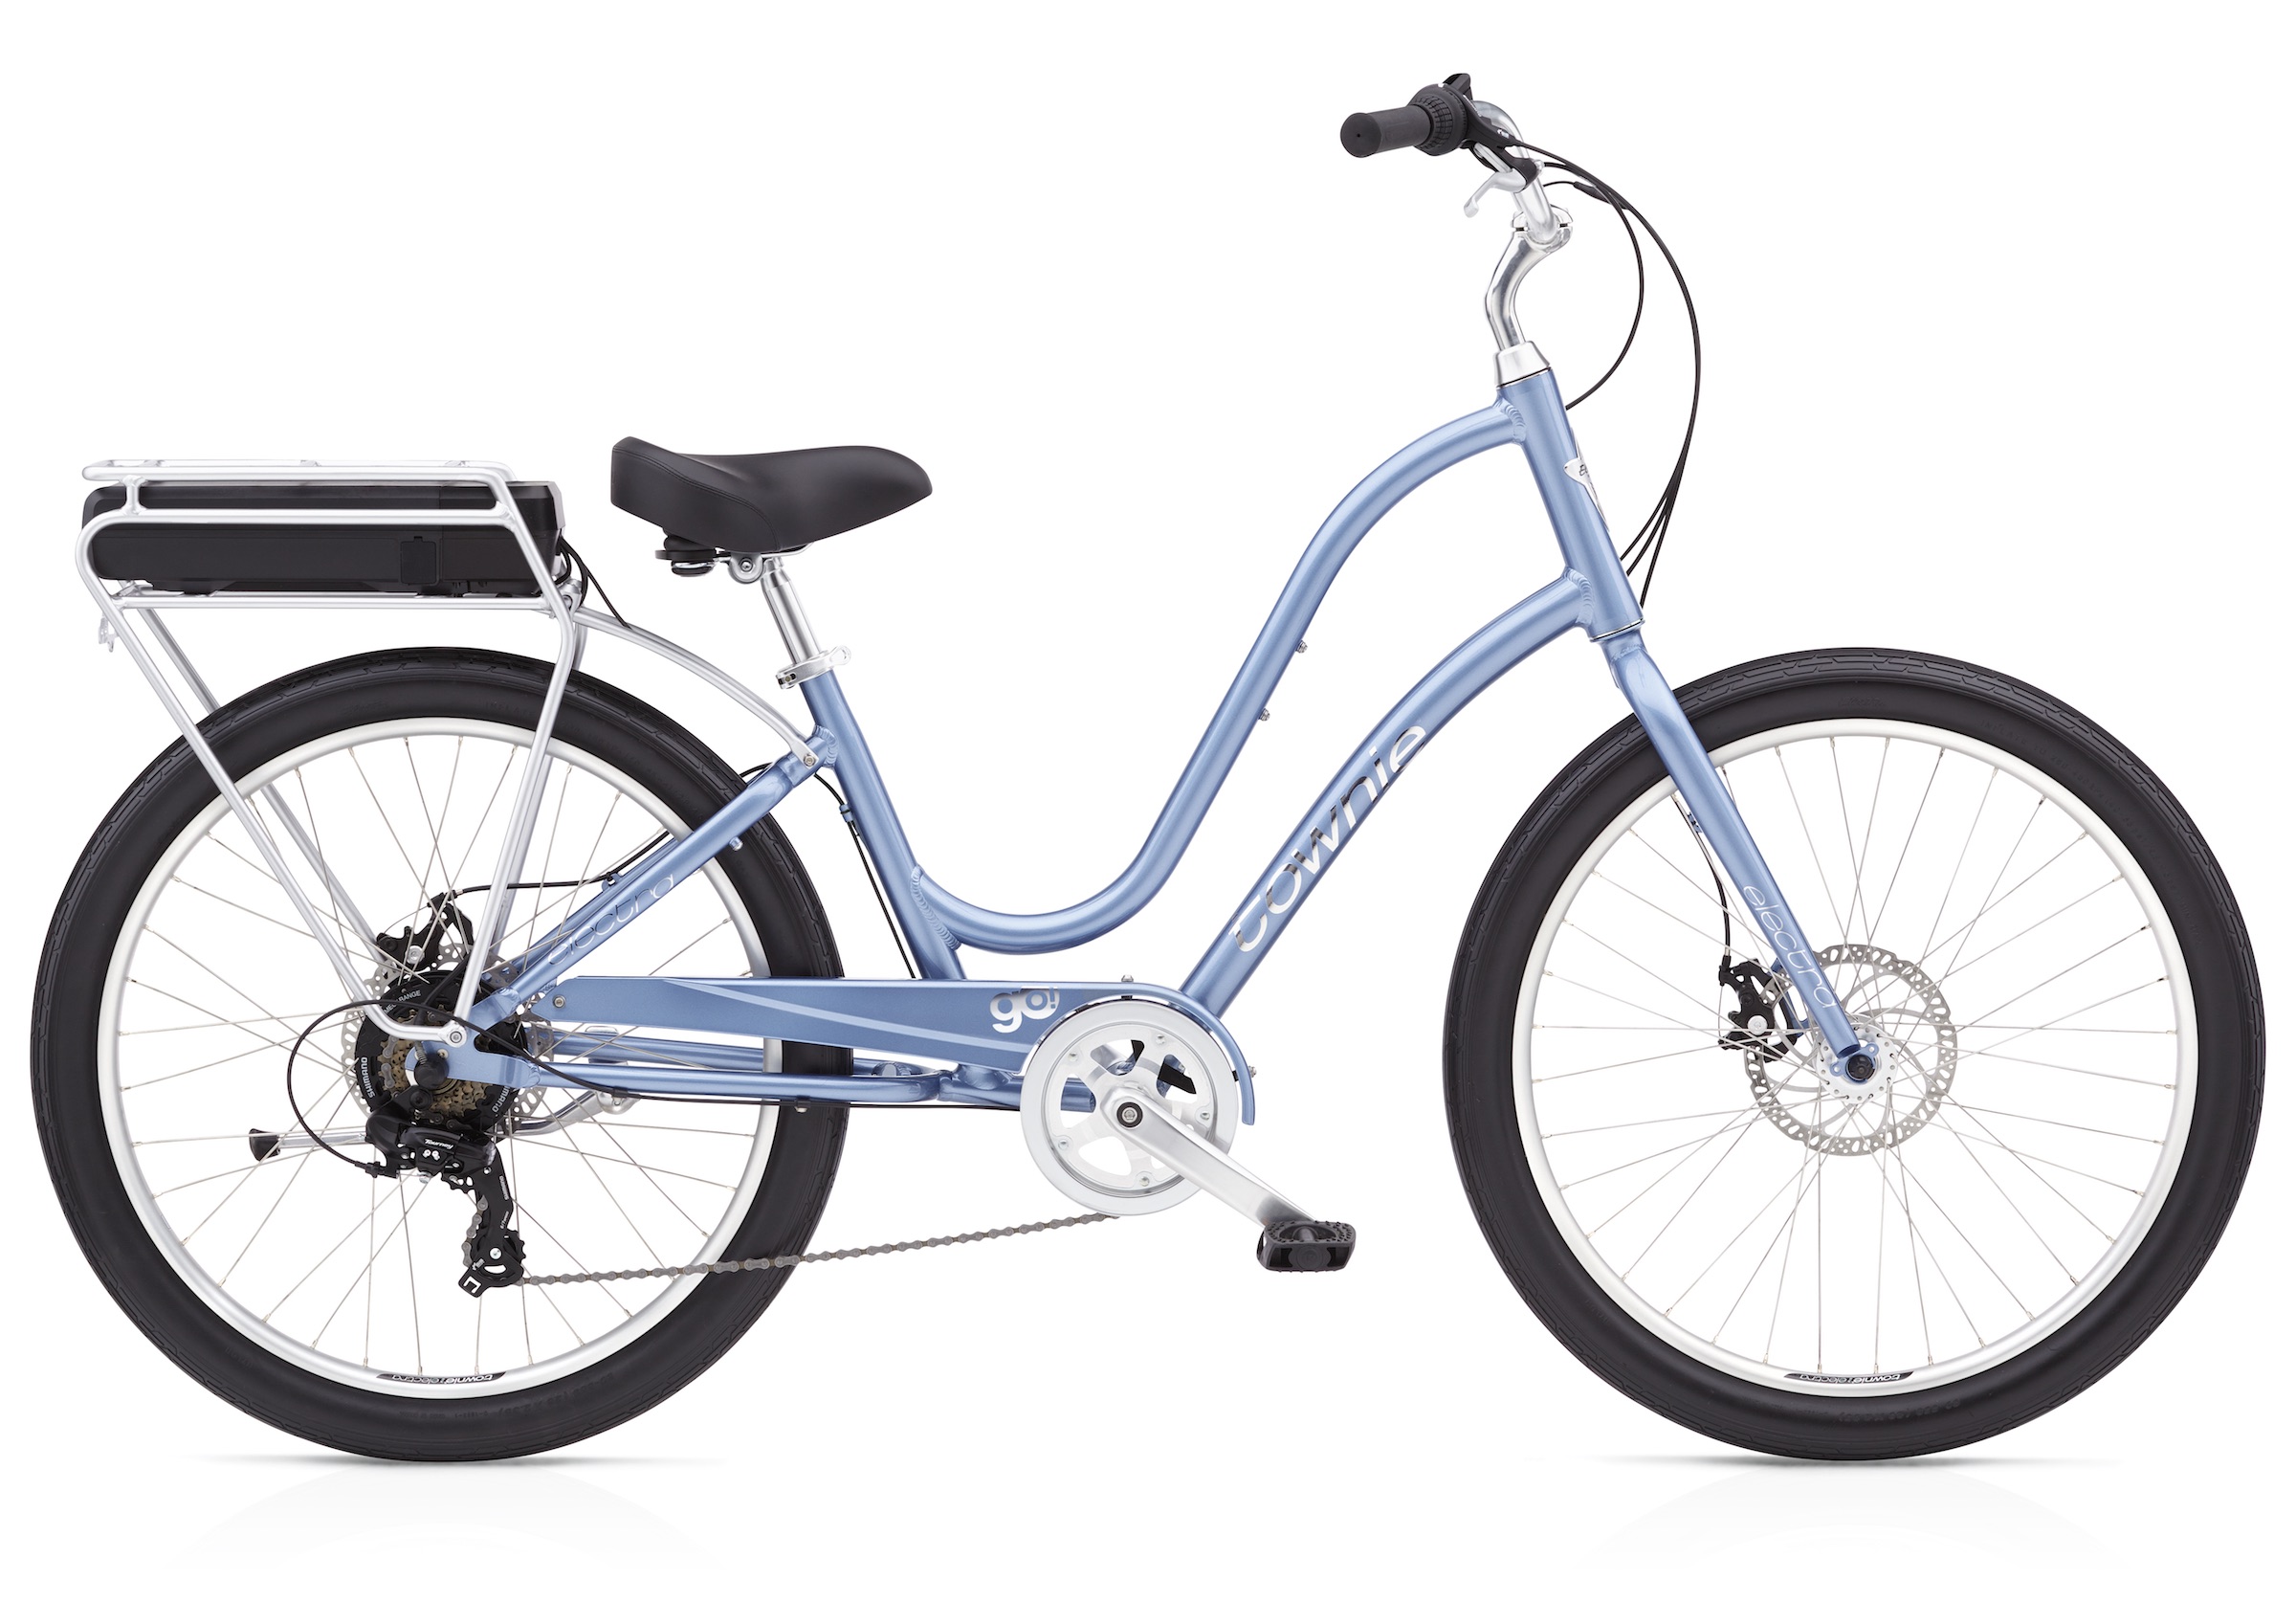 New Electra Townie Go! 7D offers is a comfortable ebike for under 1,500